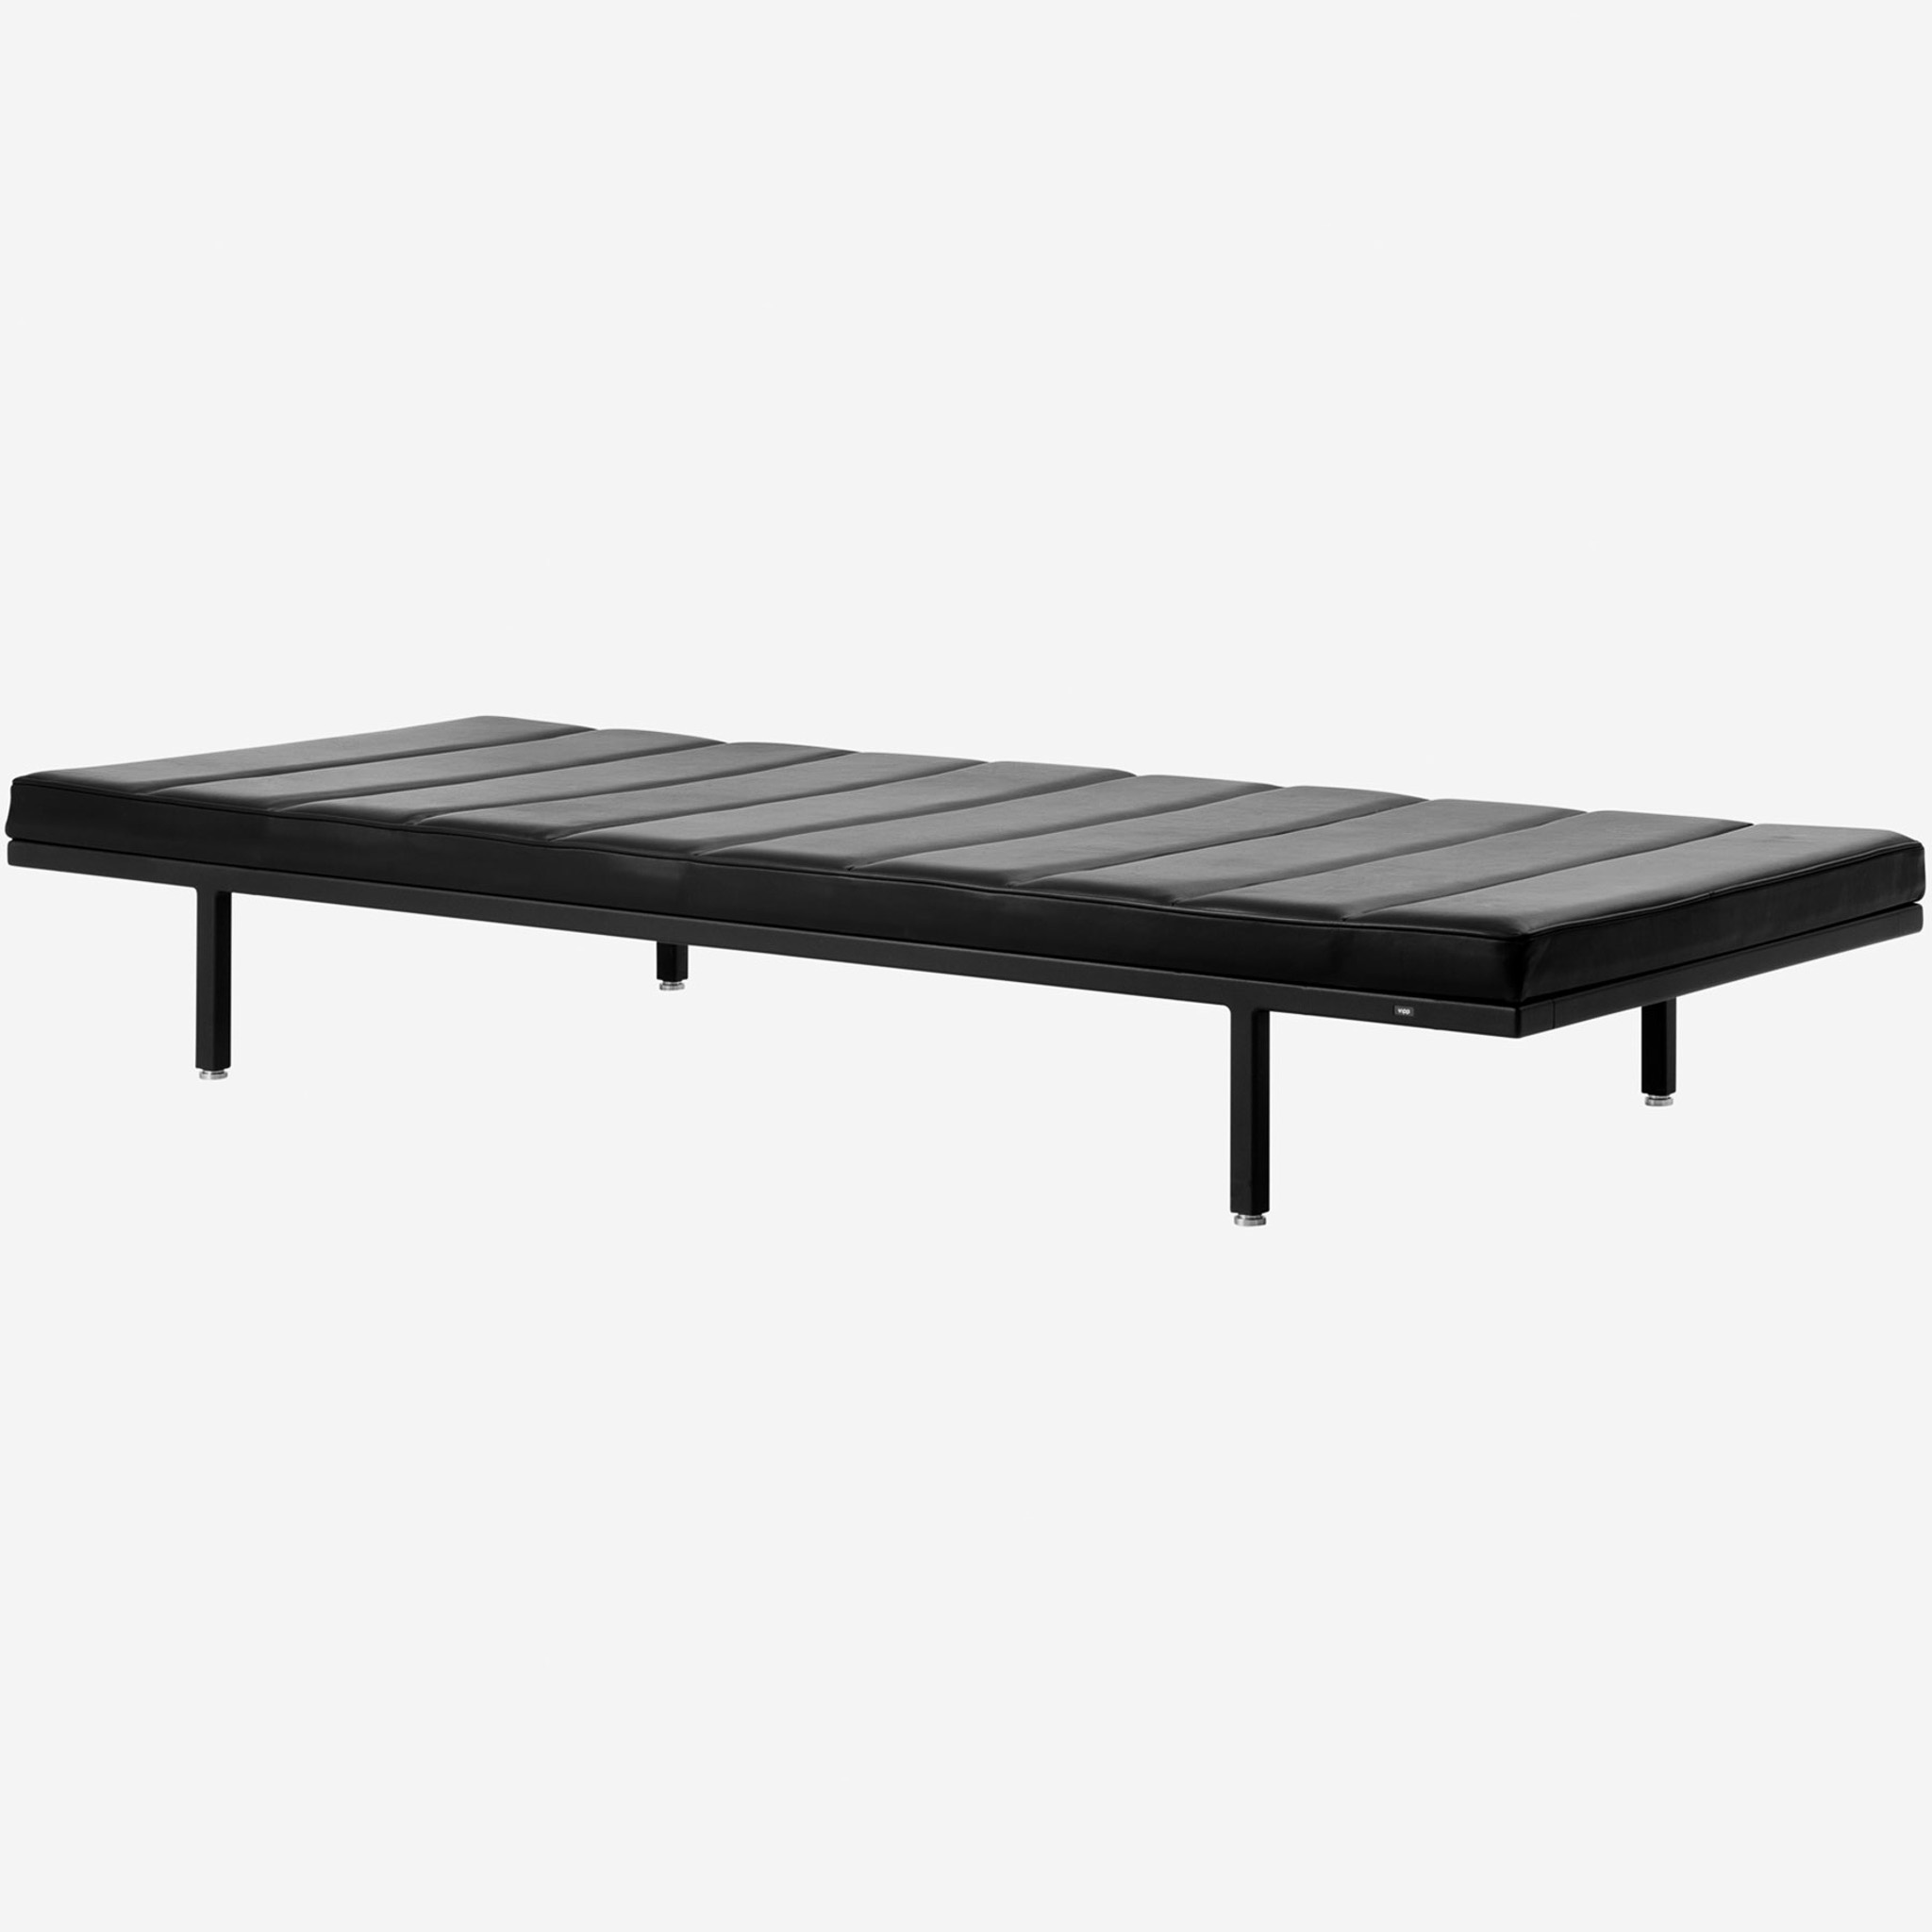 VIPP461 // DAYBED - BLACK LEATHER